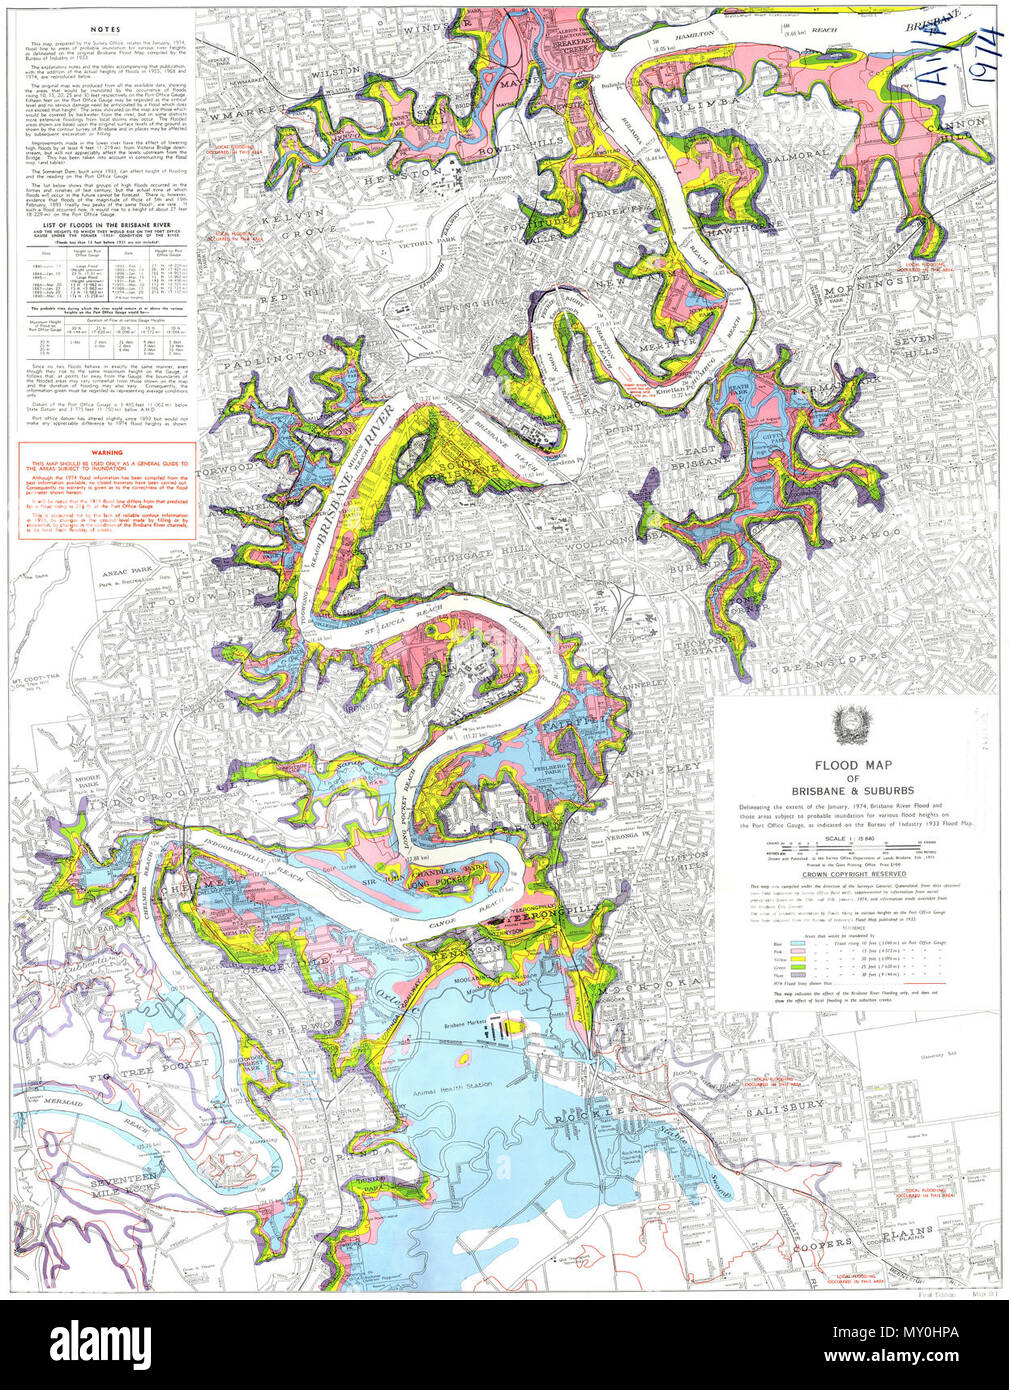 Flood map of Brisbane and suburbs, delineating the extent of. The digital image for this map was cut into two parts due to the size of the original map. They have been reassembled for ease of viewing online.  The 1974 Brisbane flood occurred in January 1974 in Brisbane, Queensland, Australia. It took place when the waterways in the city experienced significant flooding. The Brisbane River, which runs through the heart of the city, broke its banks and flooded the surrounding areas.  In total, there were 14 fatalities, 300 people injured, 8000 homes destroyed and an estimated A$68 million in dam Stock Photo